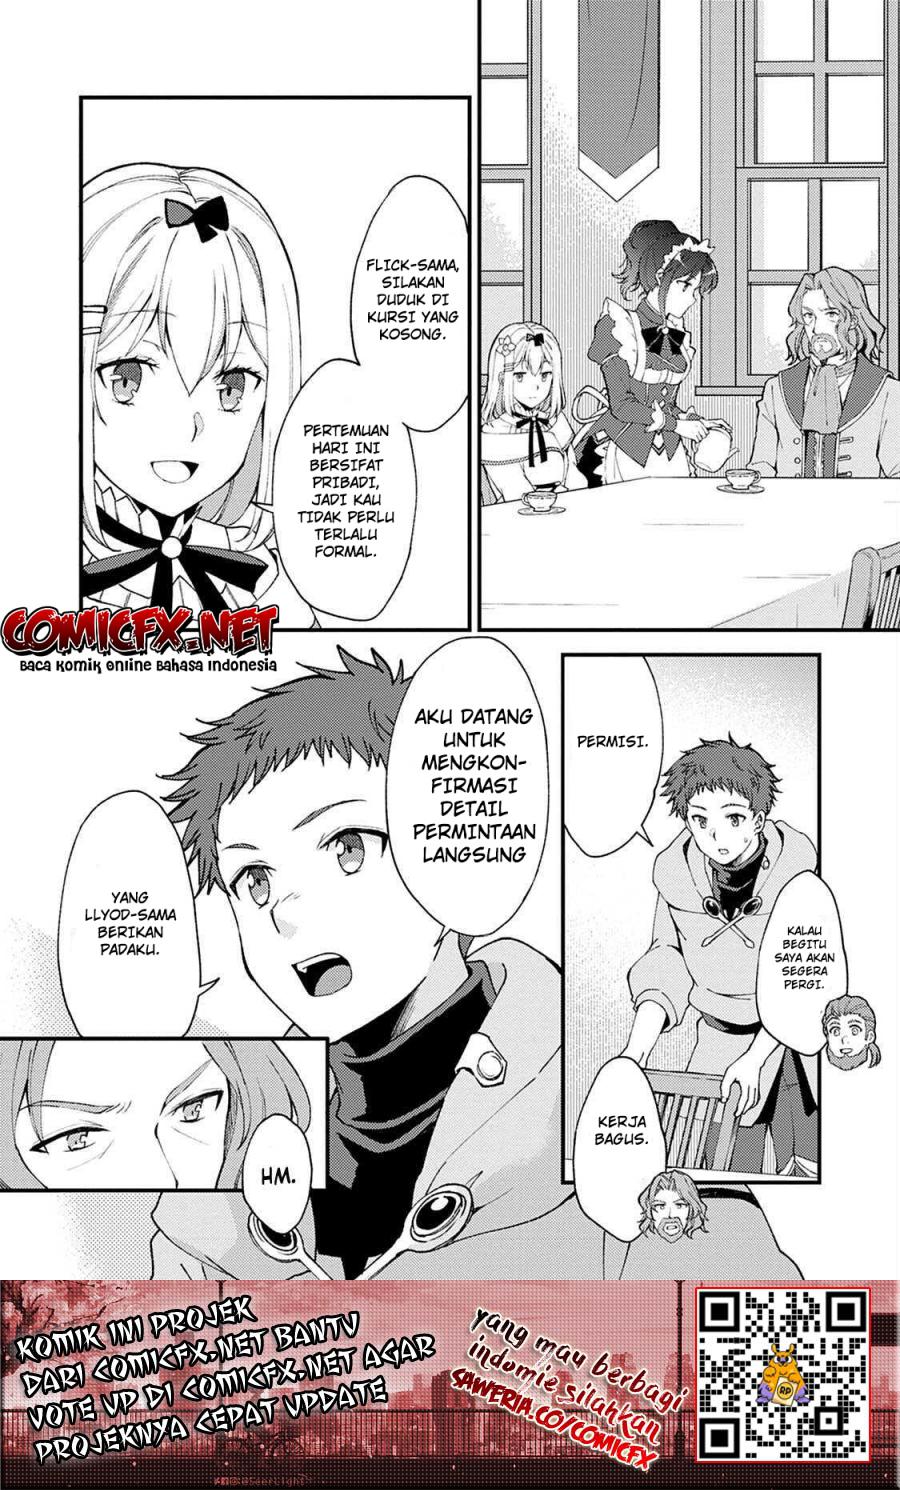 A Sword Master Childhood Friend Power Harassed Me Harshly, So I Broke off Our Relationship and Make a Fresh Start at the Frontier as a Magic Swordsman Chapter 08.1